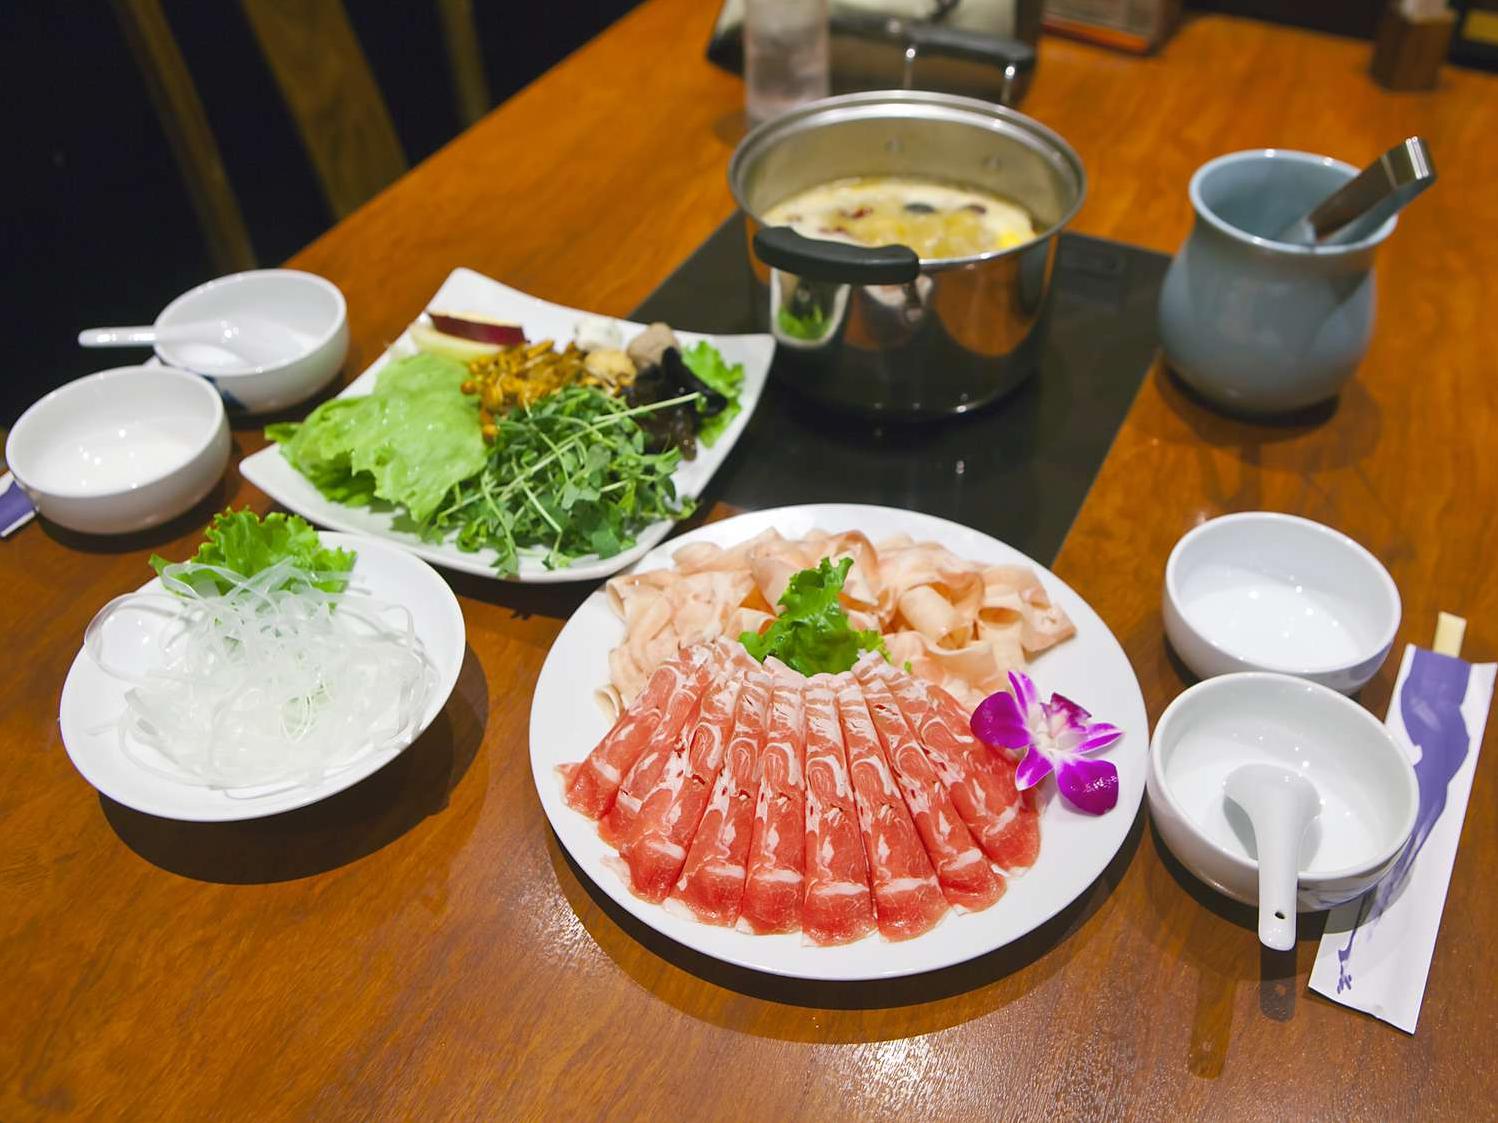  Perfect for sharing, the hot pot is a communal dish meant for enjoying with friends and family.